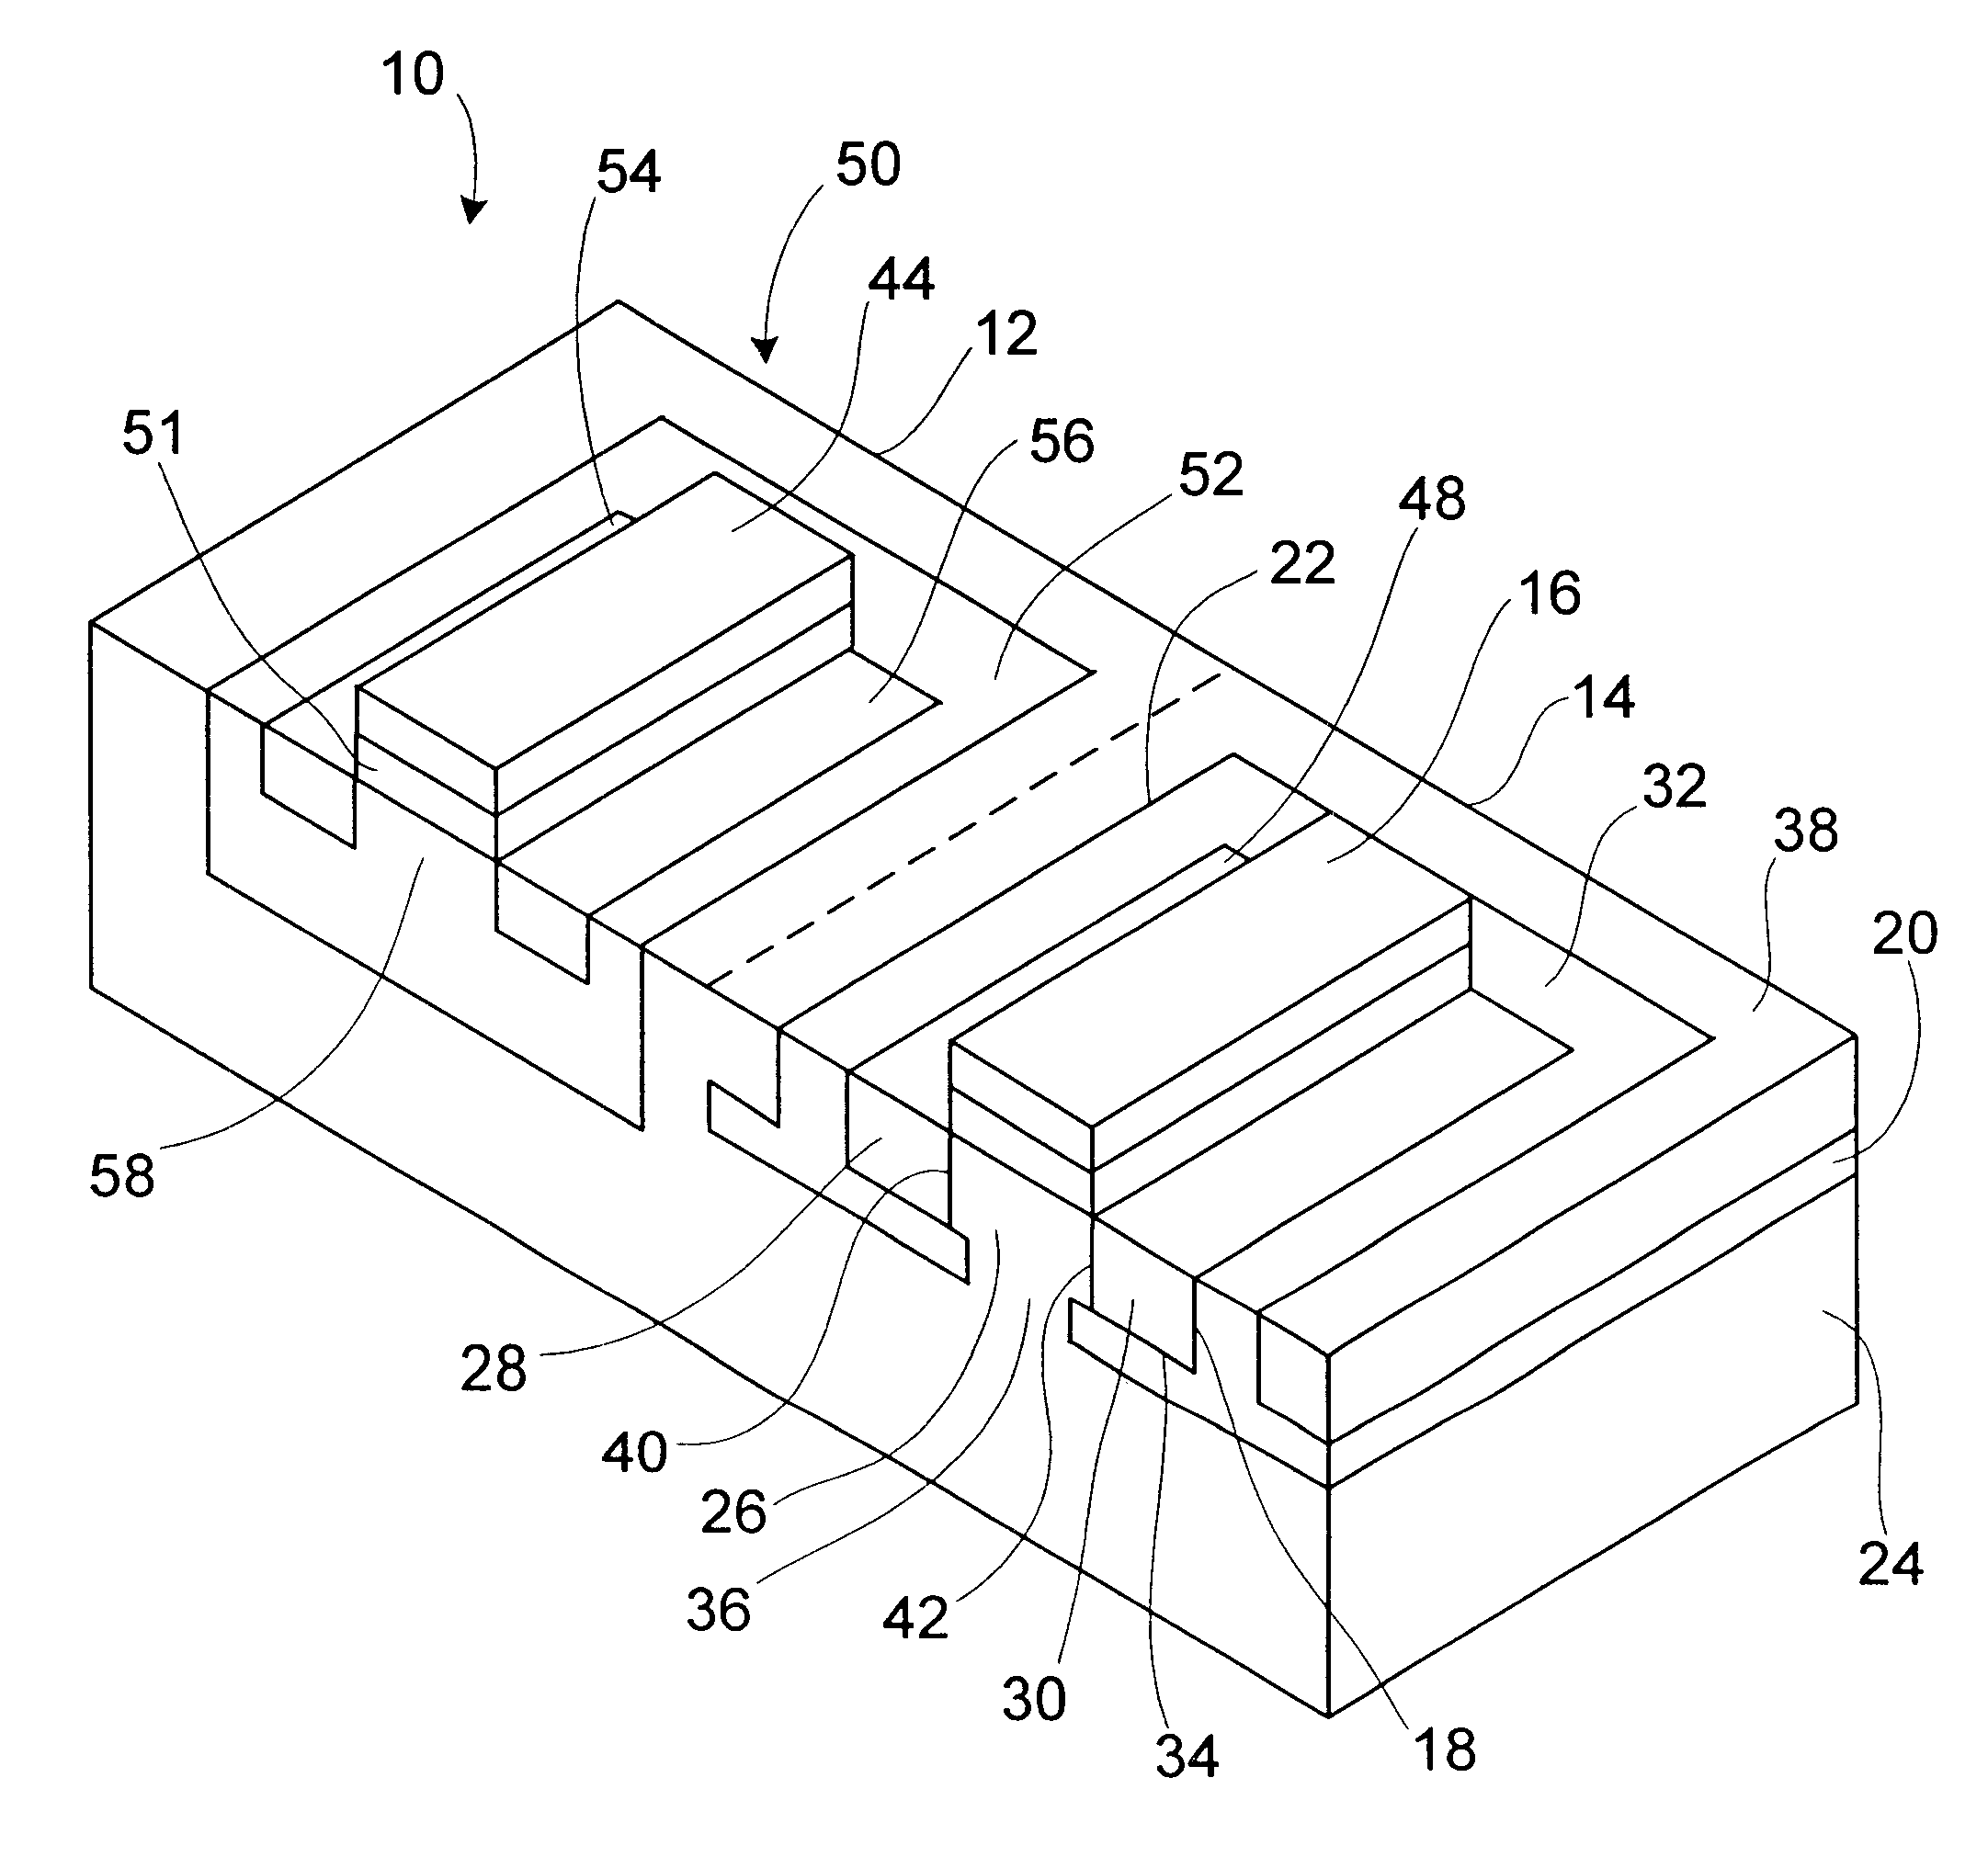 Silicon wafer including both bulk and SOI regions and method for forming same on a bulk silicon wafer